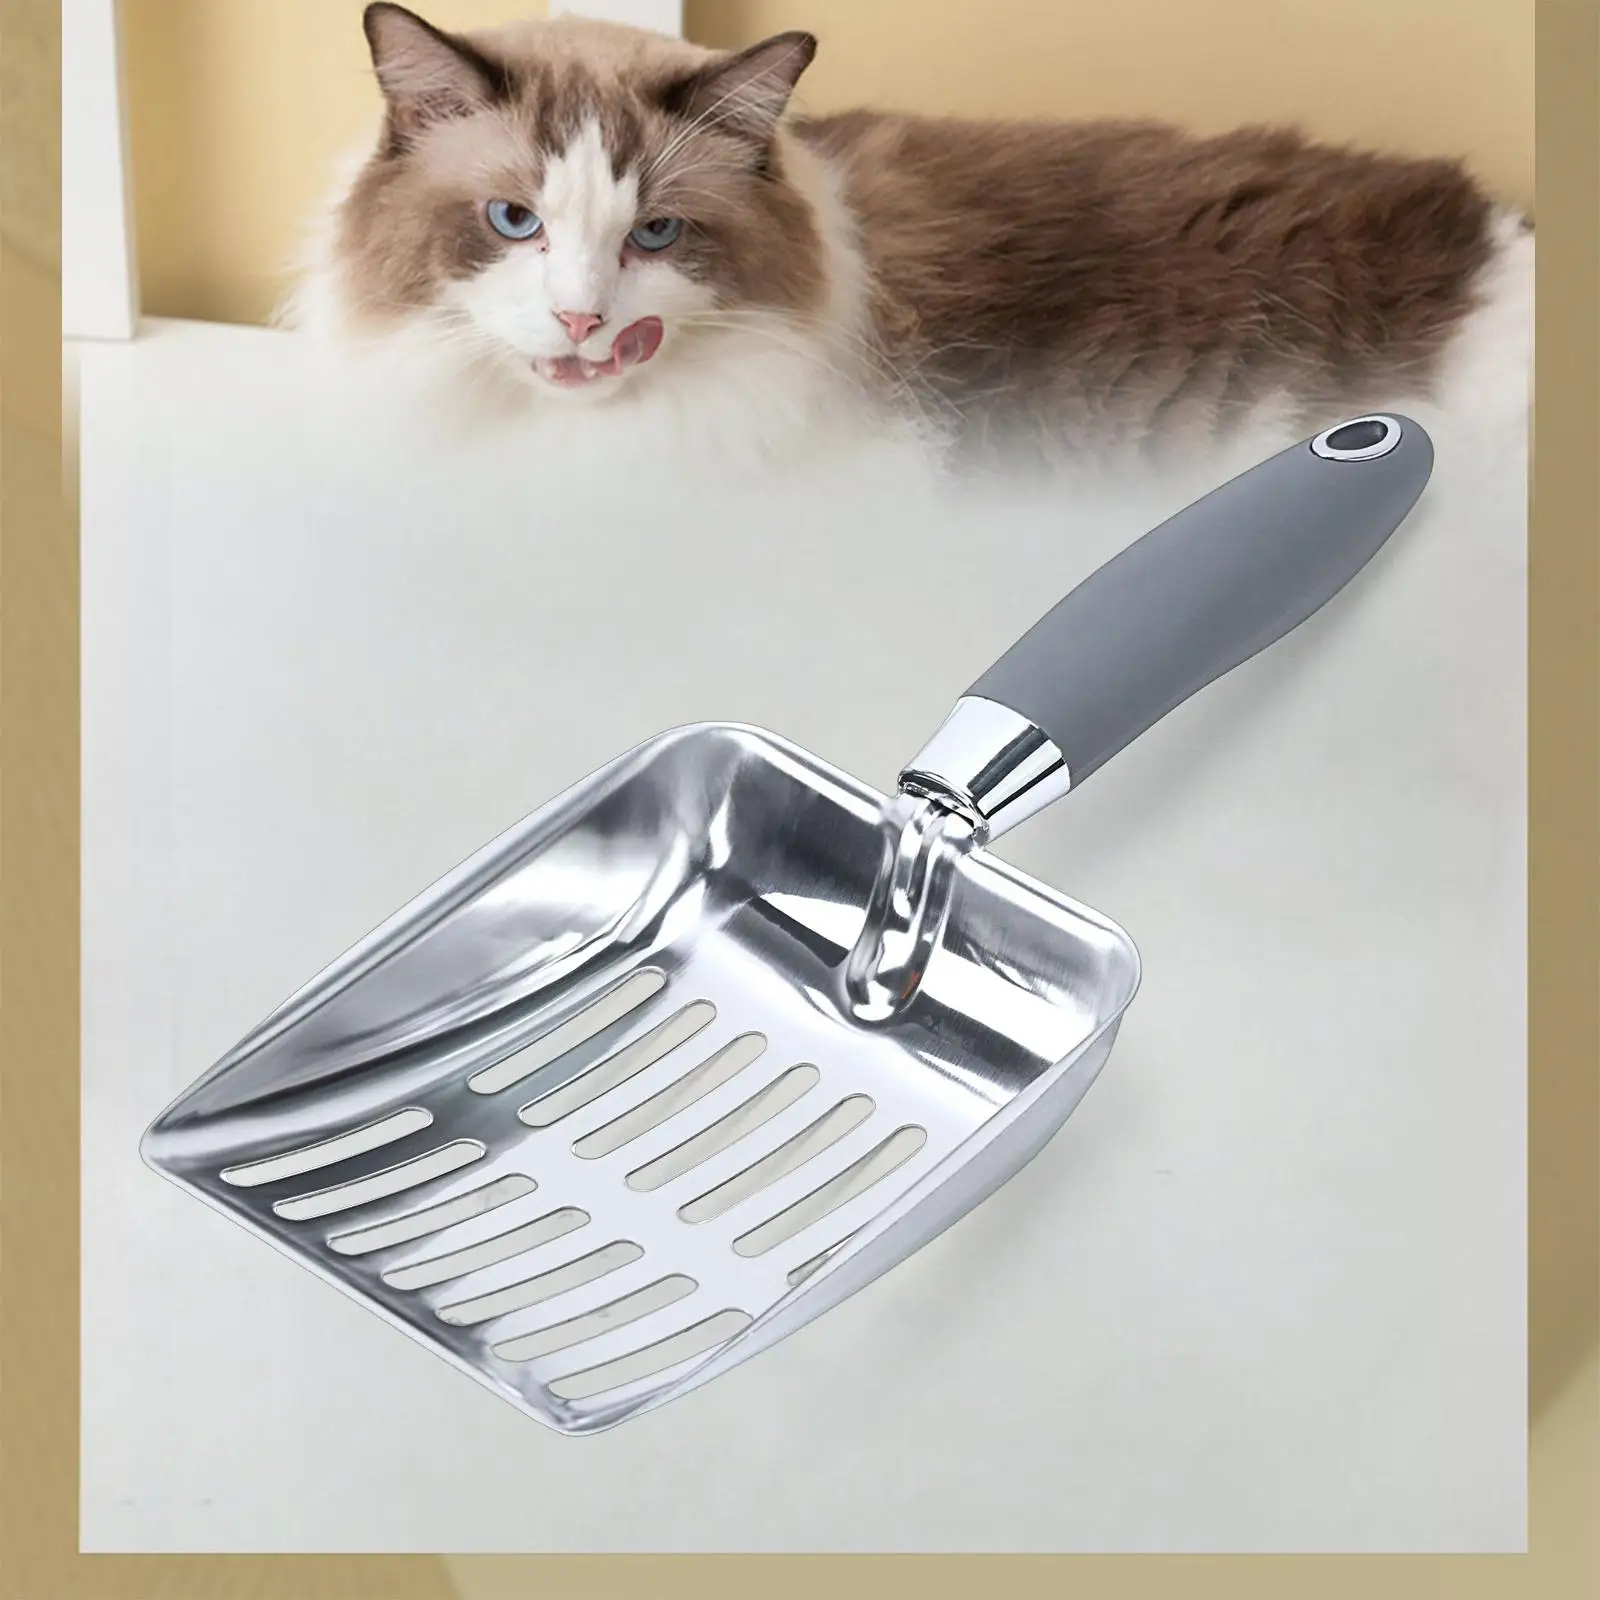 Cat Litter Sifting Scoop Sifting Heavy Duty Litter Scooper for Cleaning Kittens